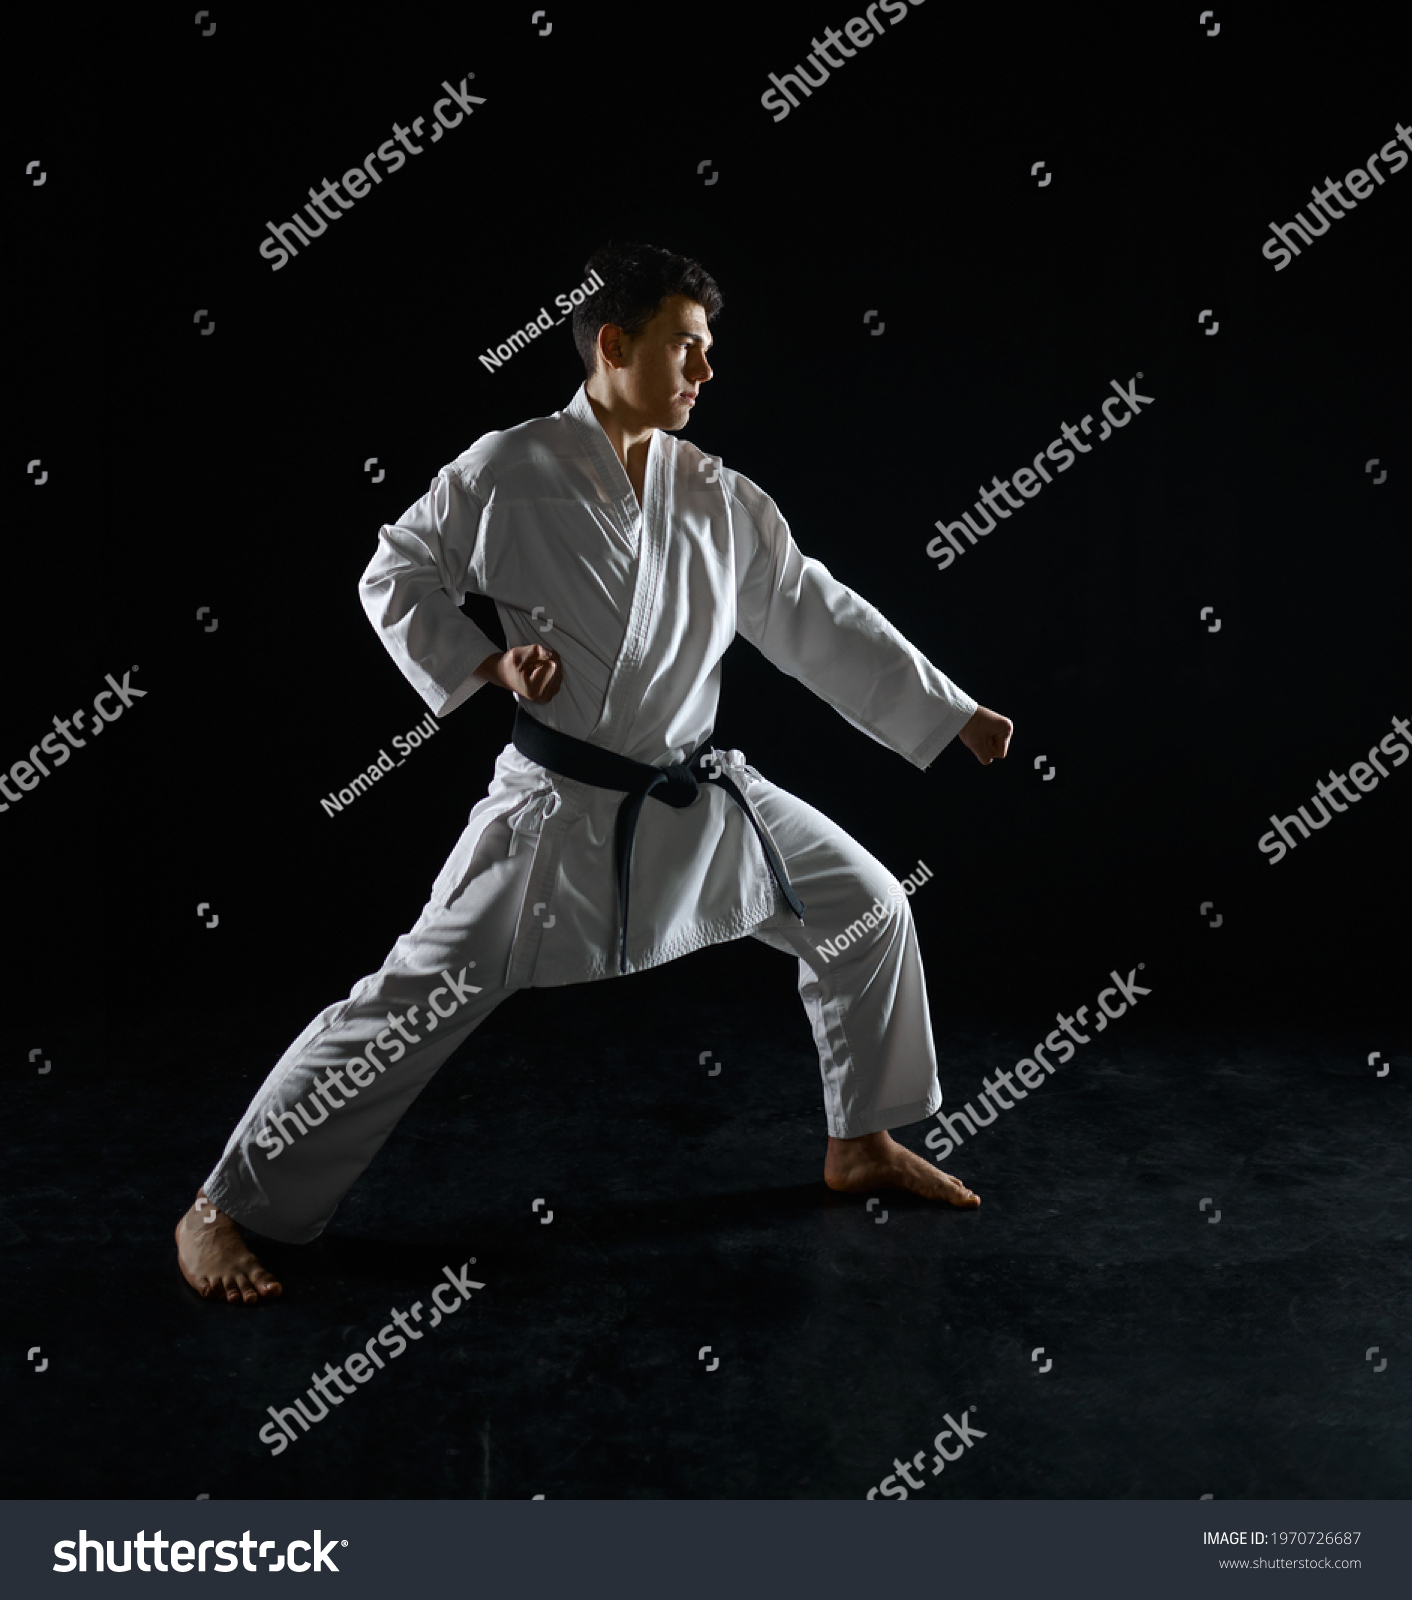 Male Karate Fighter Combat Stance Stock Photo 1970726687 | Shutterstock